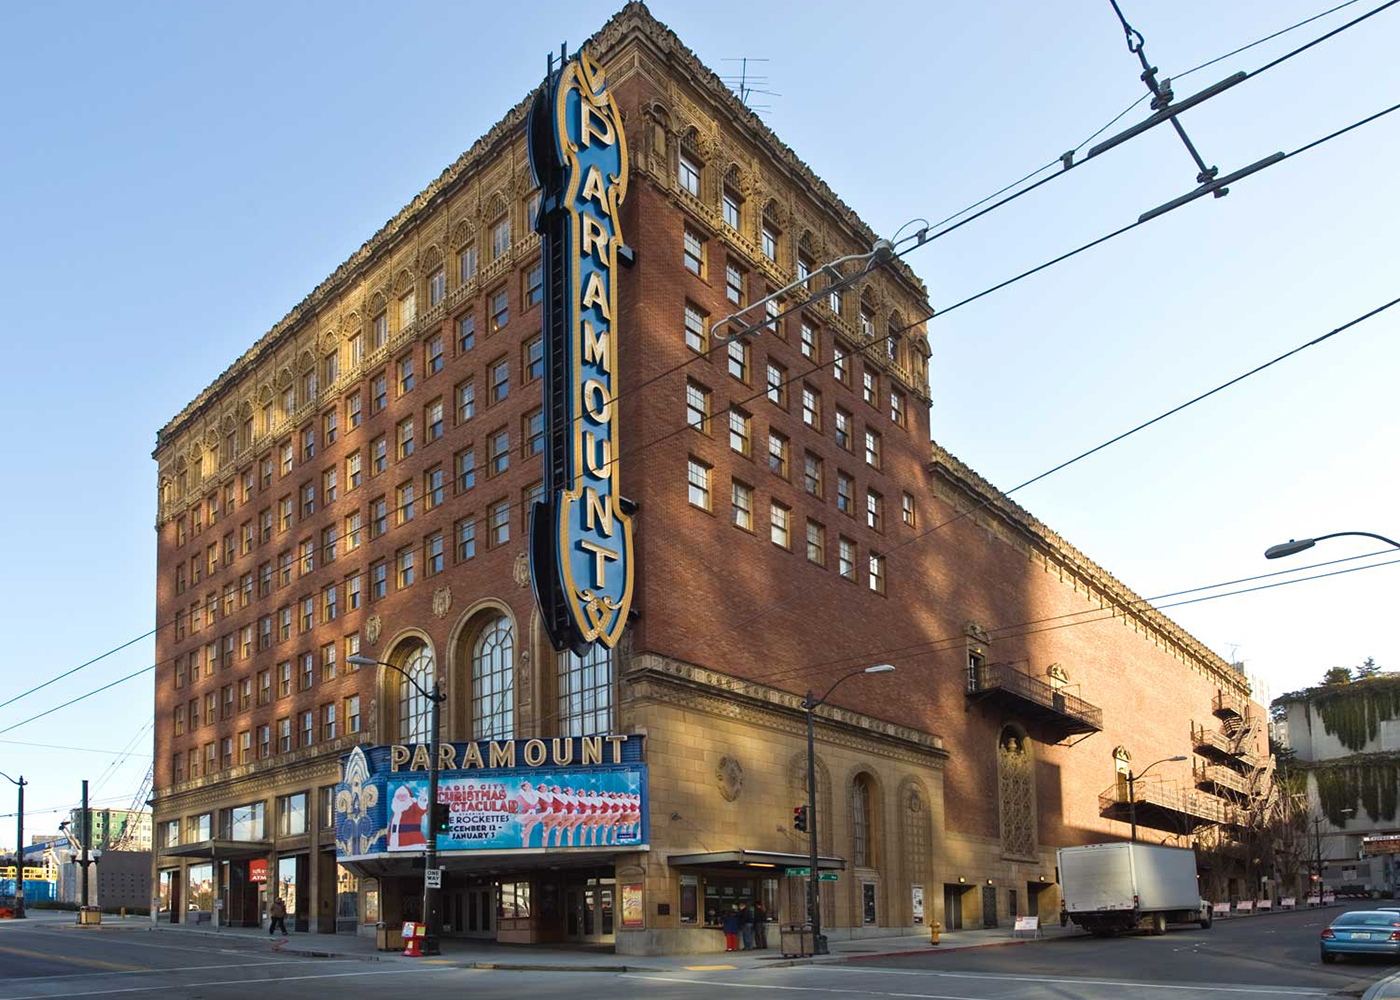 This is a photo of the Paramount Theatre in Seattle, Washington.